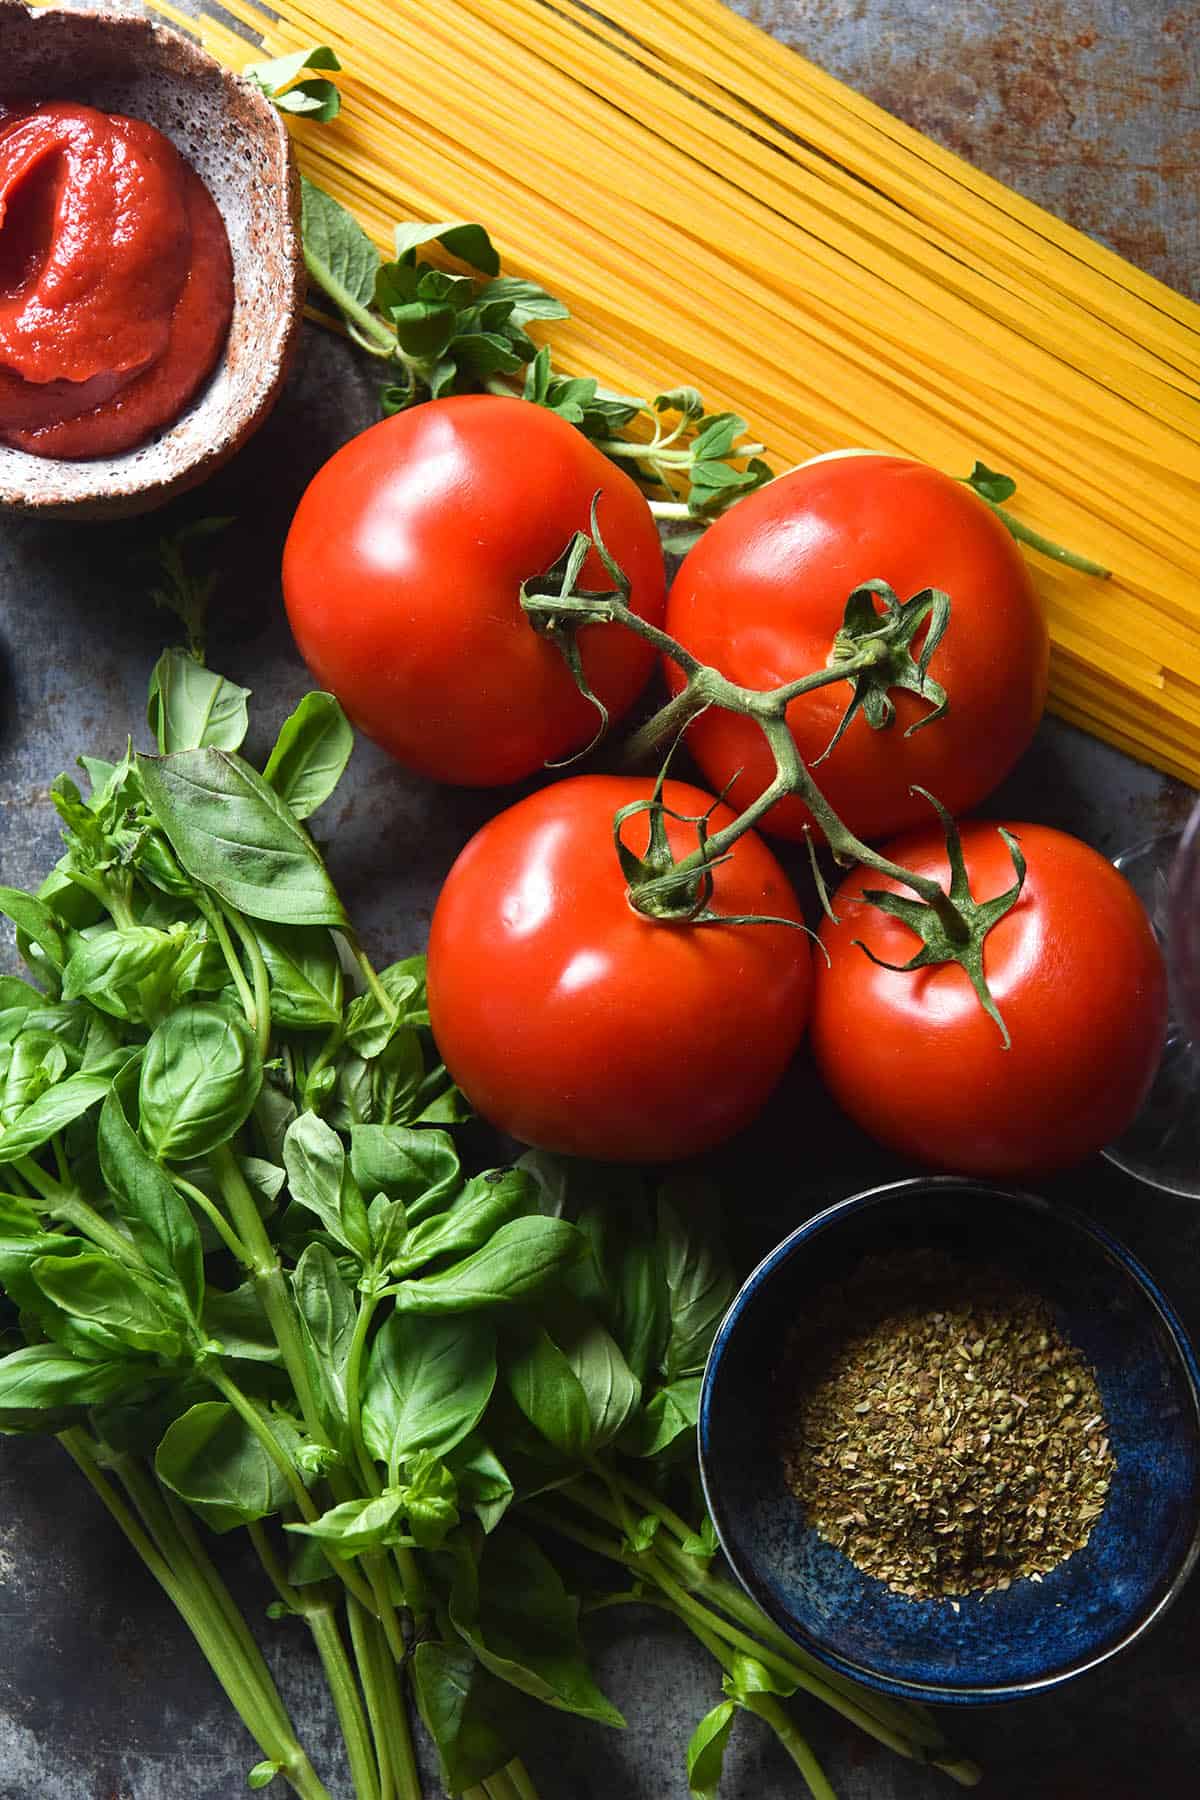 An aerial close up image of vine tomatoes, basil, uncooked spaghetti and pinch bowls of dried herbs and tomato paste arranged on a medium blue steel backdrop